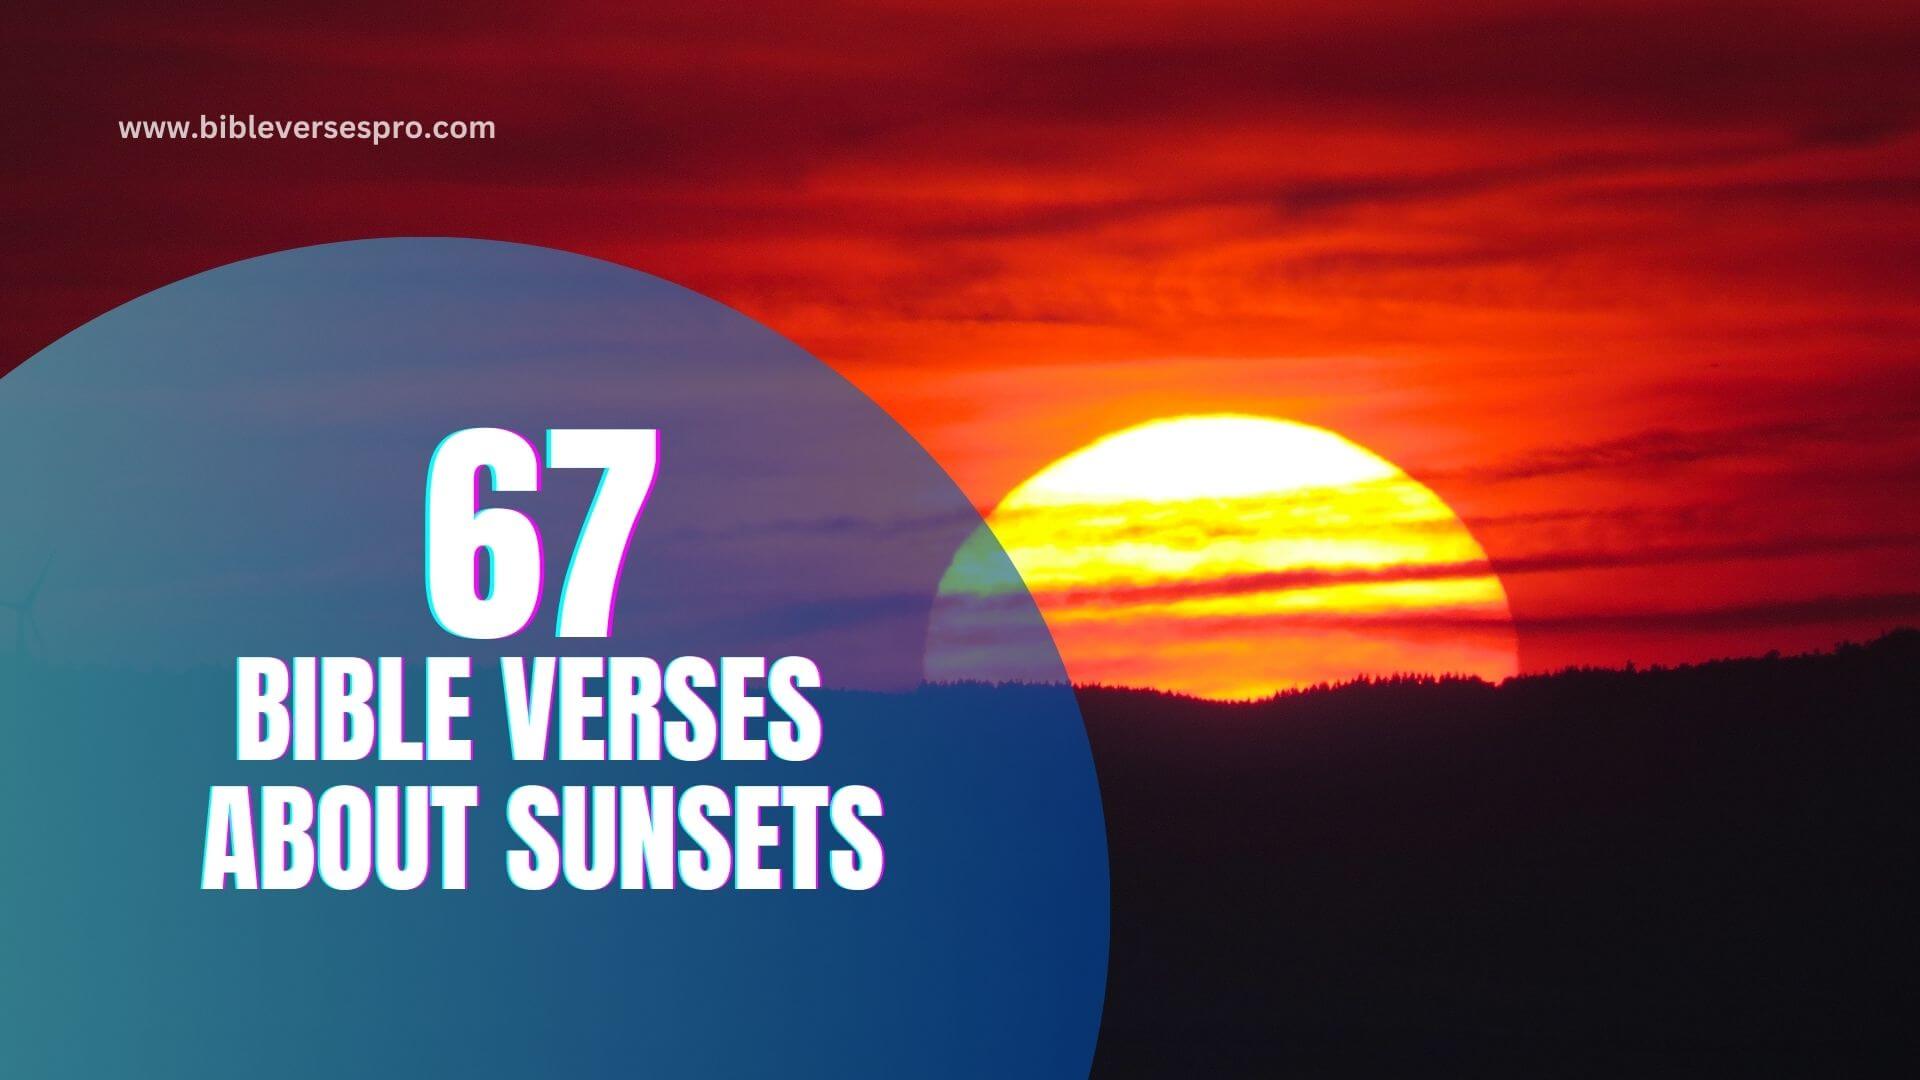 BIBLE VERSES ABOUT SUNSETS (1)